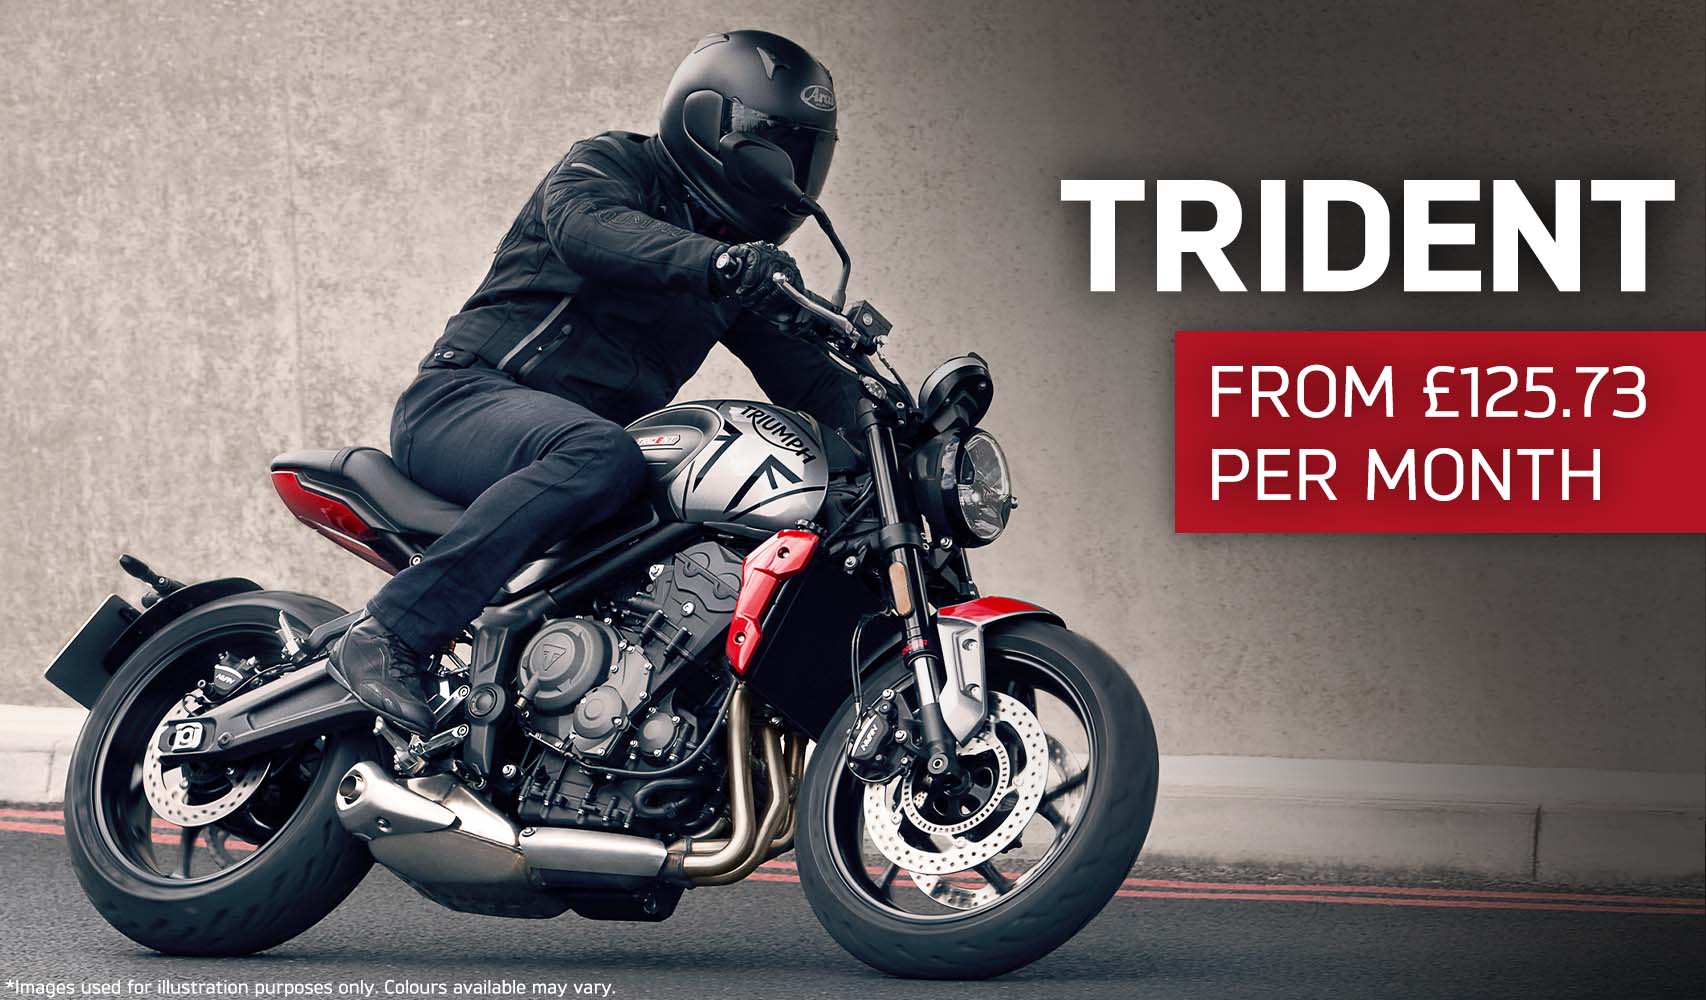 Our new Triumph in-stock bikes - The Trident